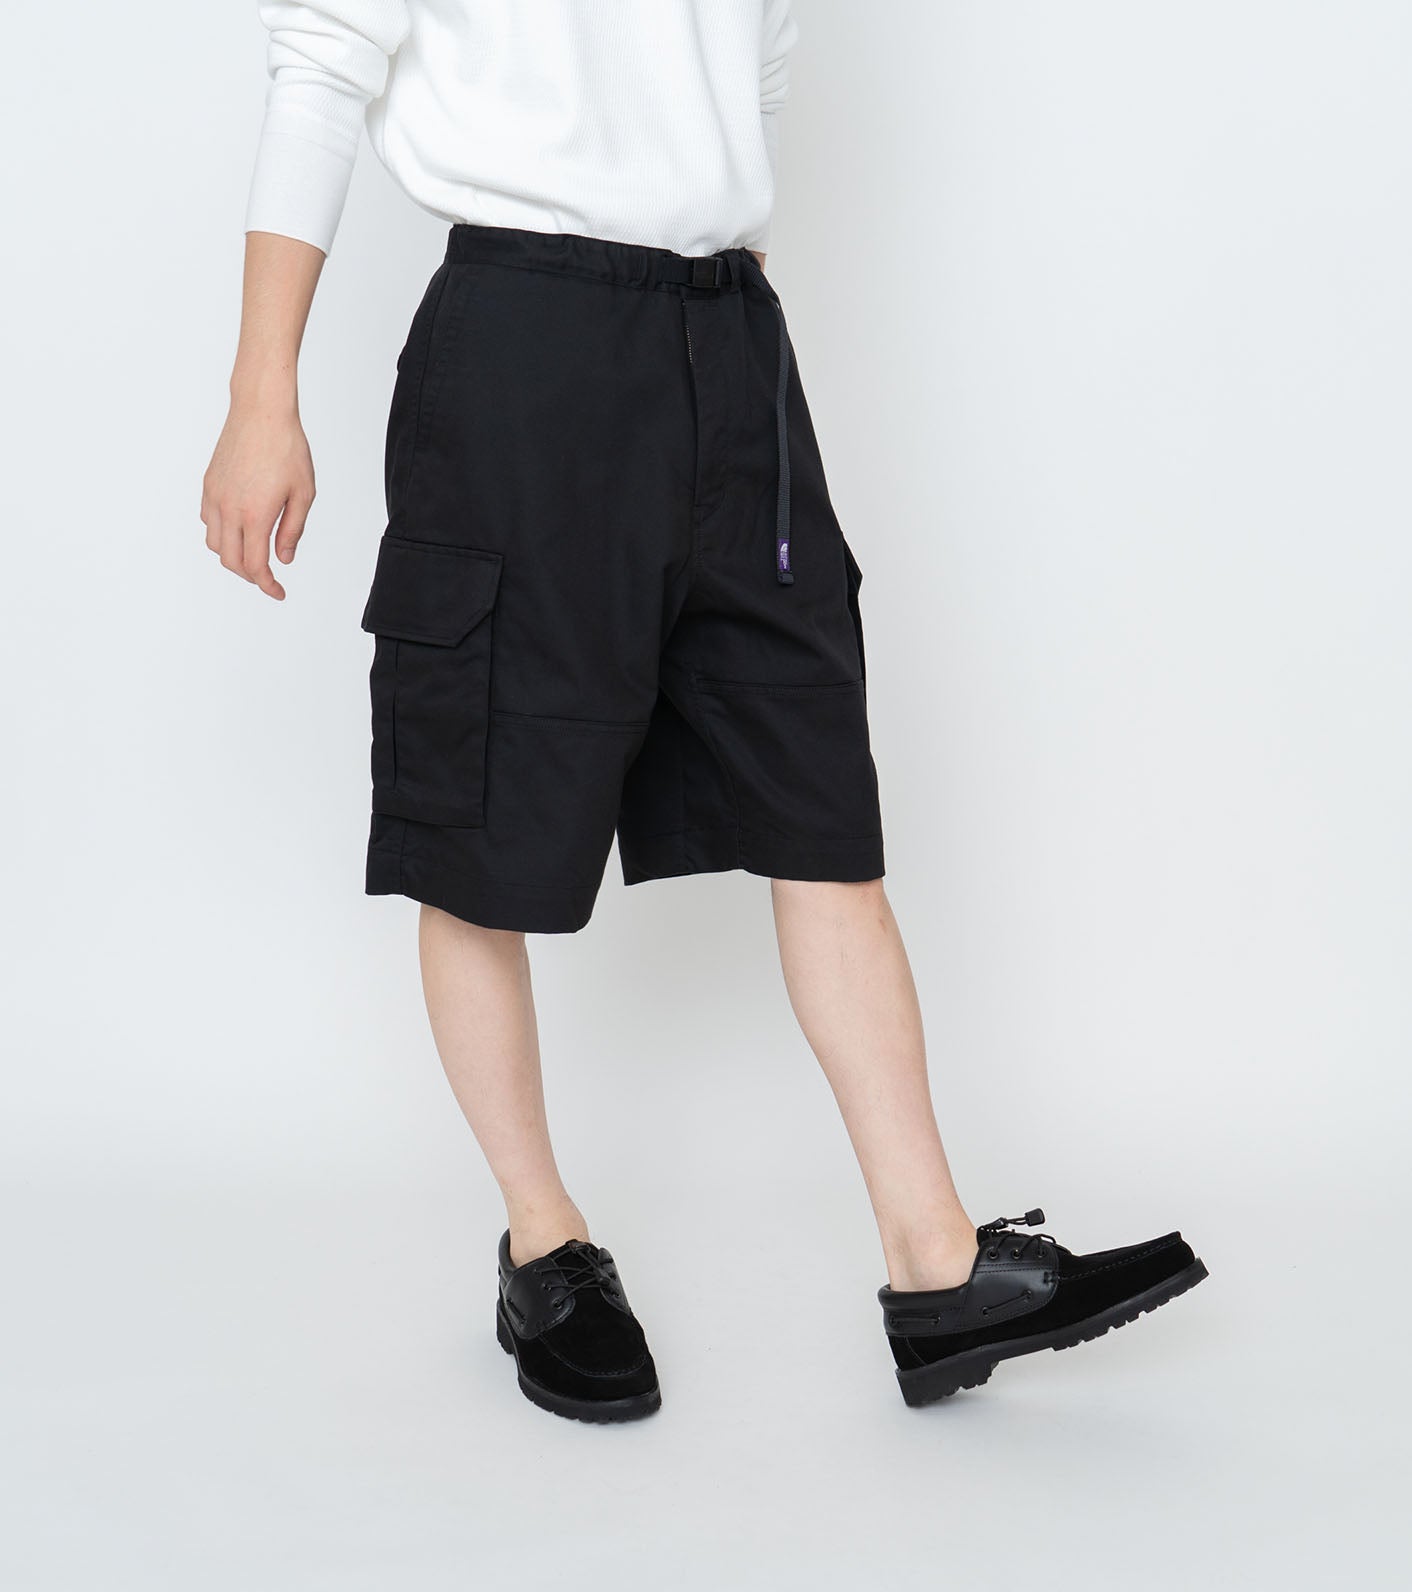 THE NORTH FACE PURPLE LABEL Stretch Twill Cargo Shorts